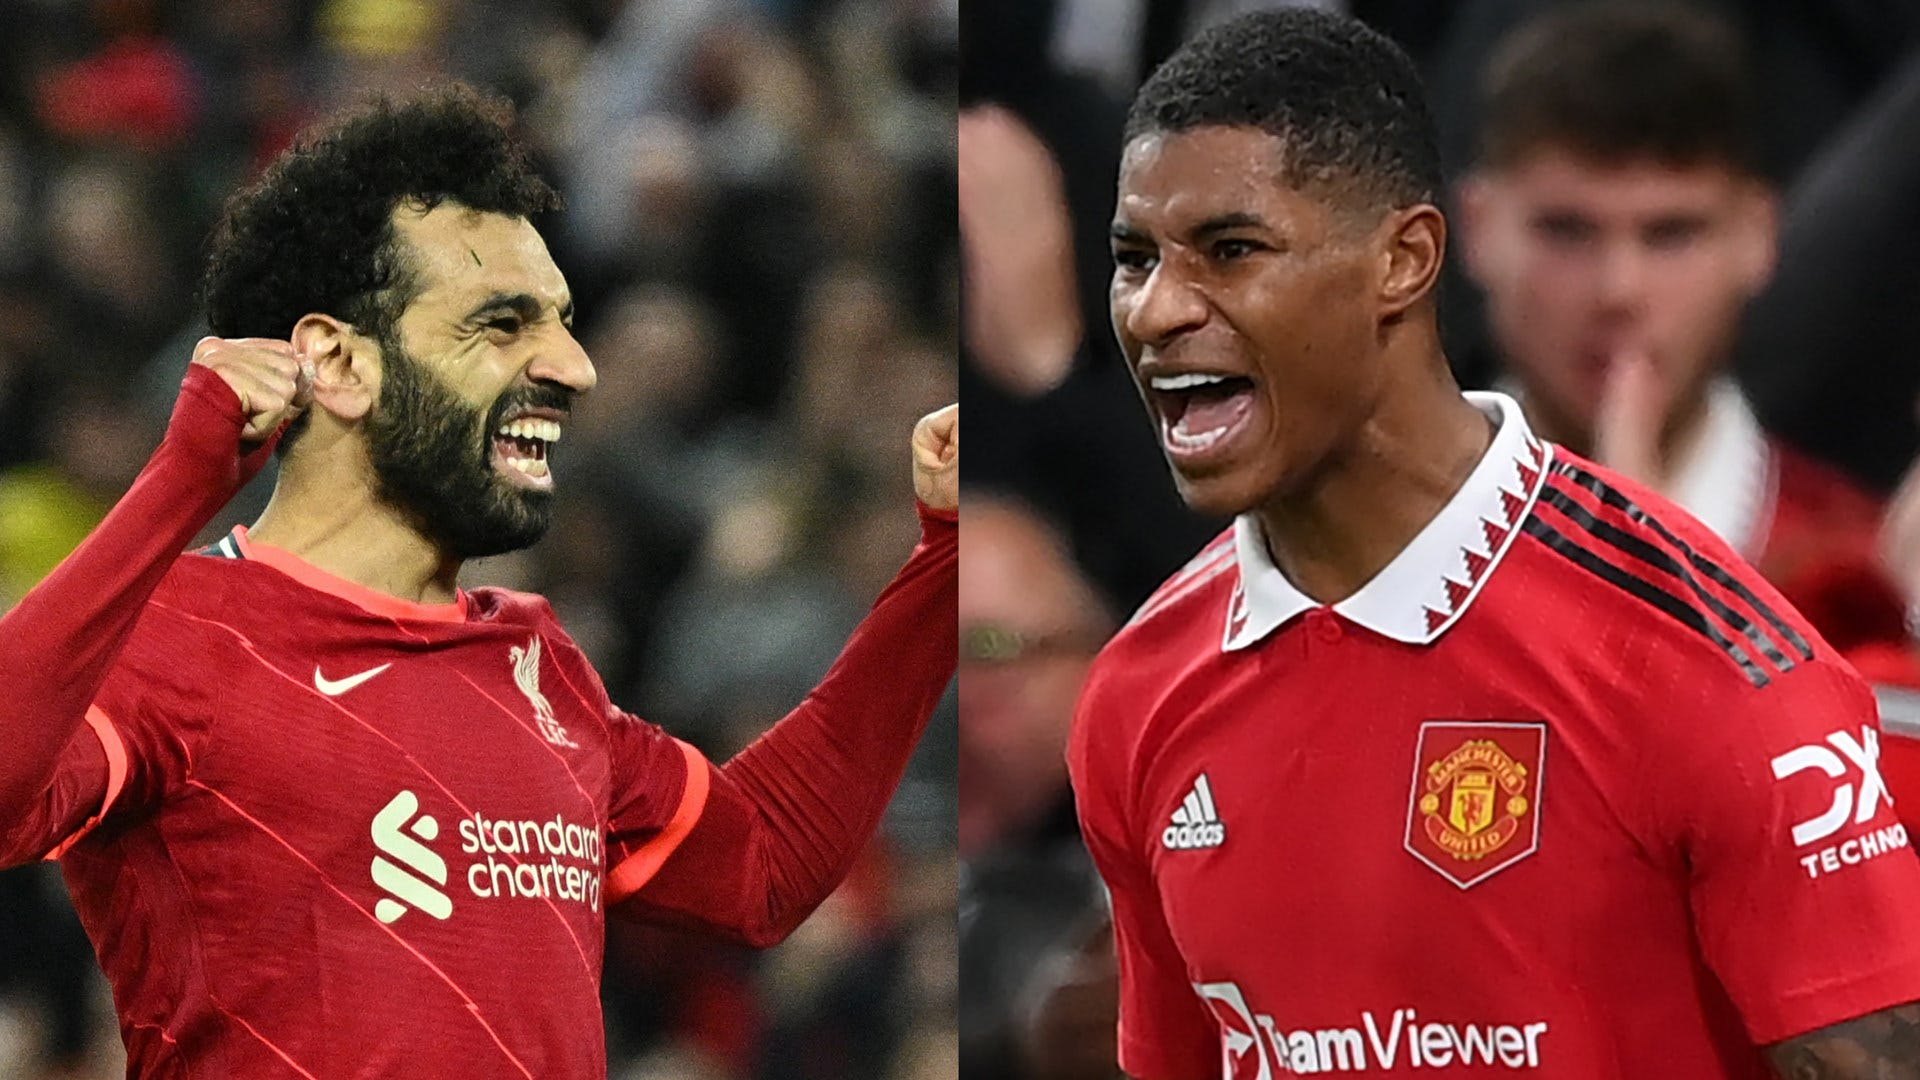 Liverpool vs Manchester United Live stream, TV channel, kick-off time and where to watch Goal India